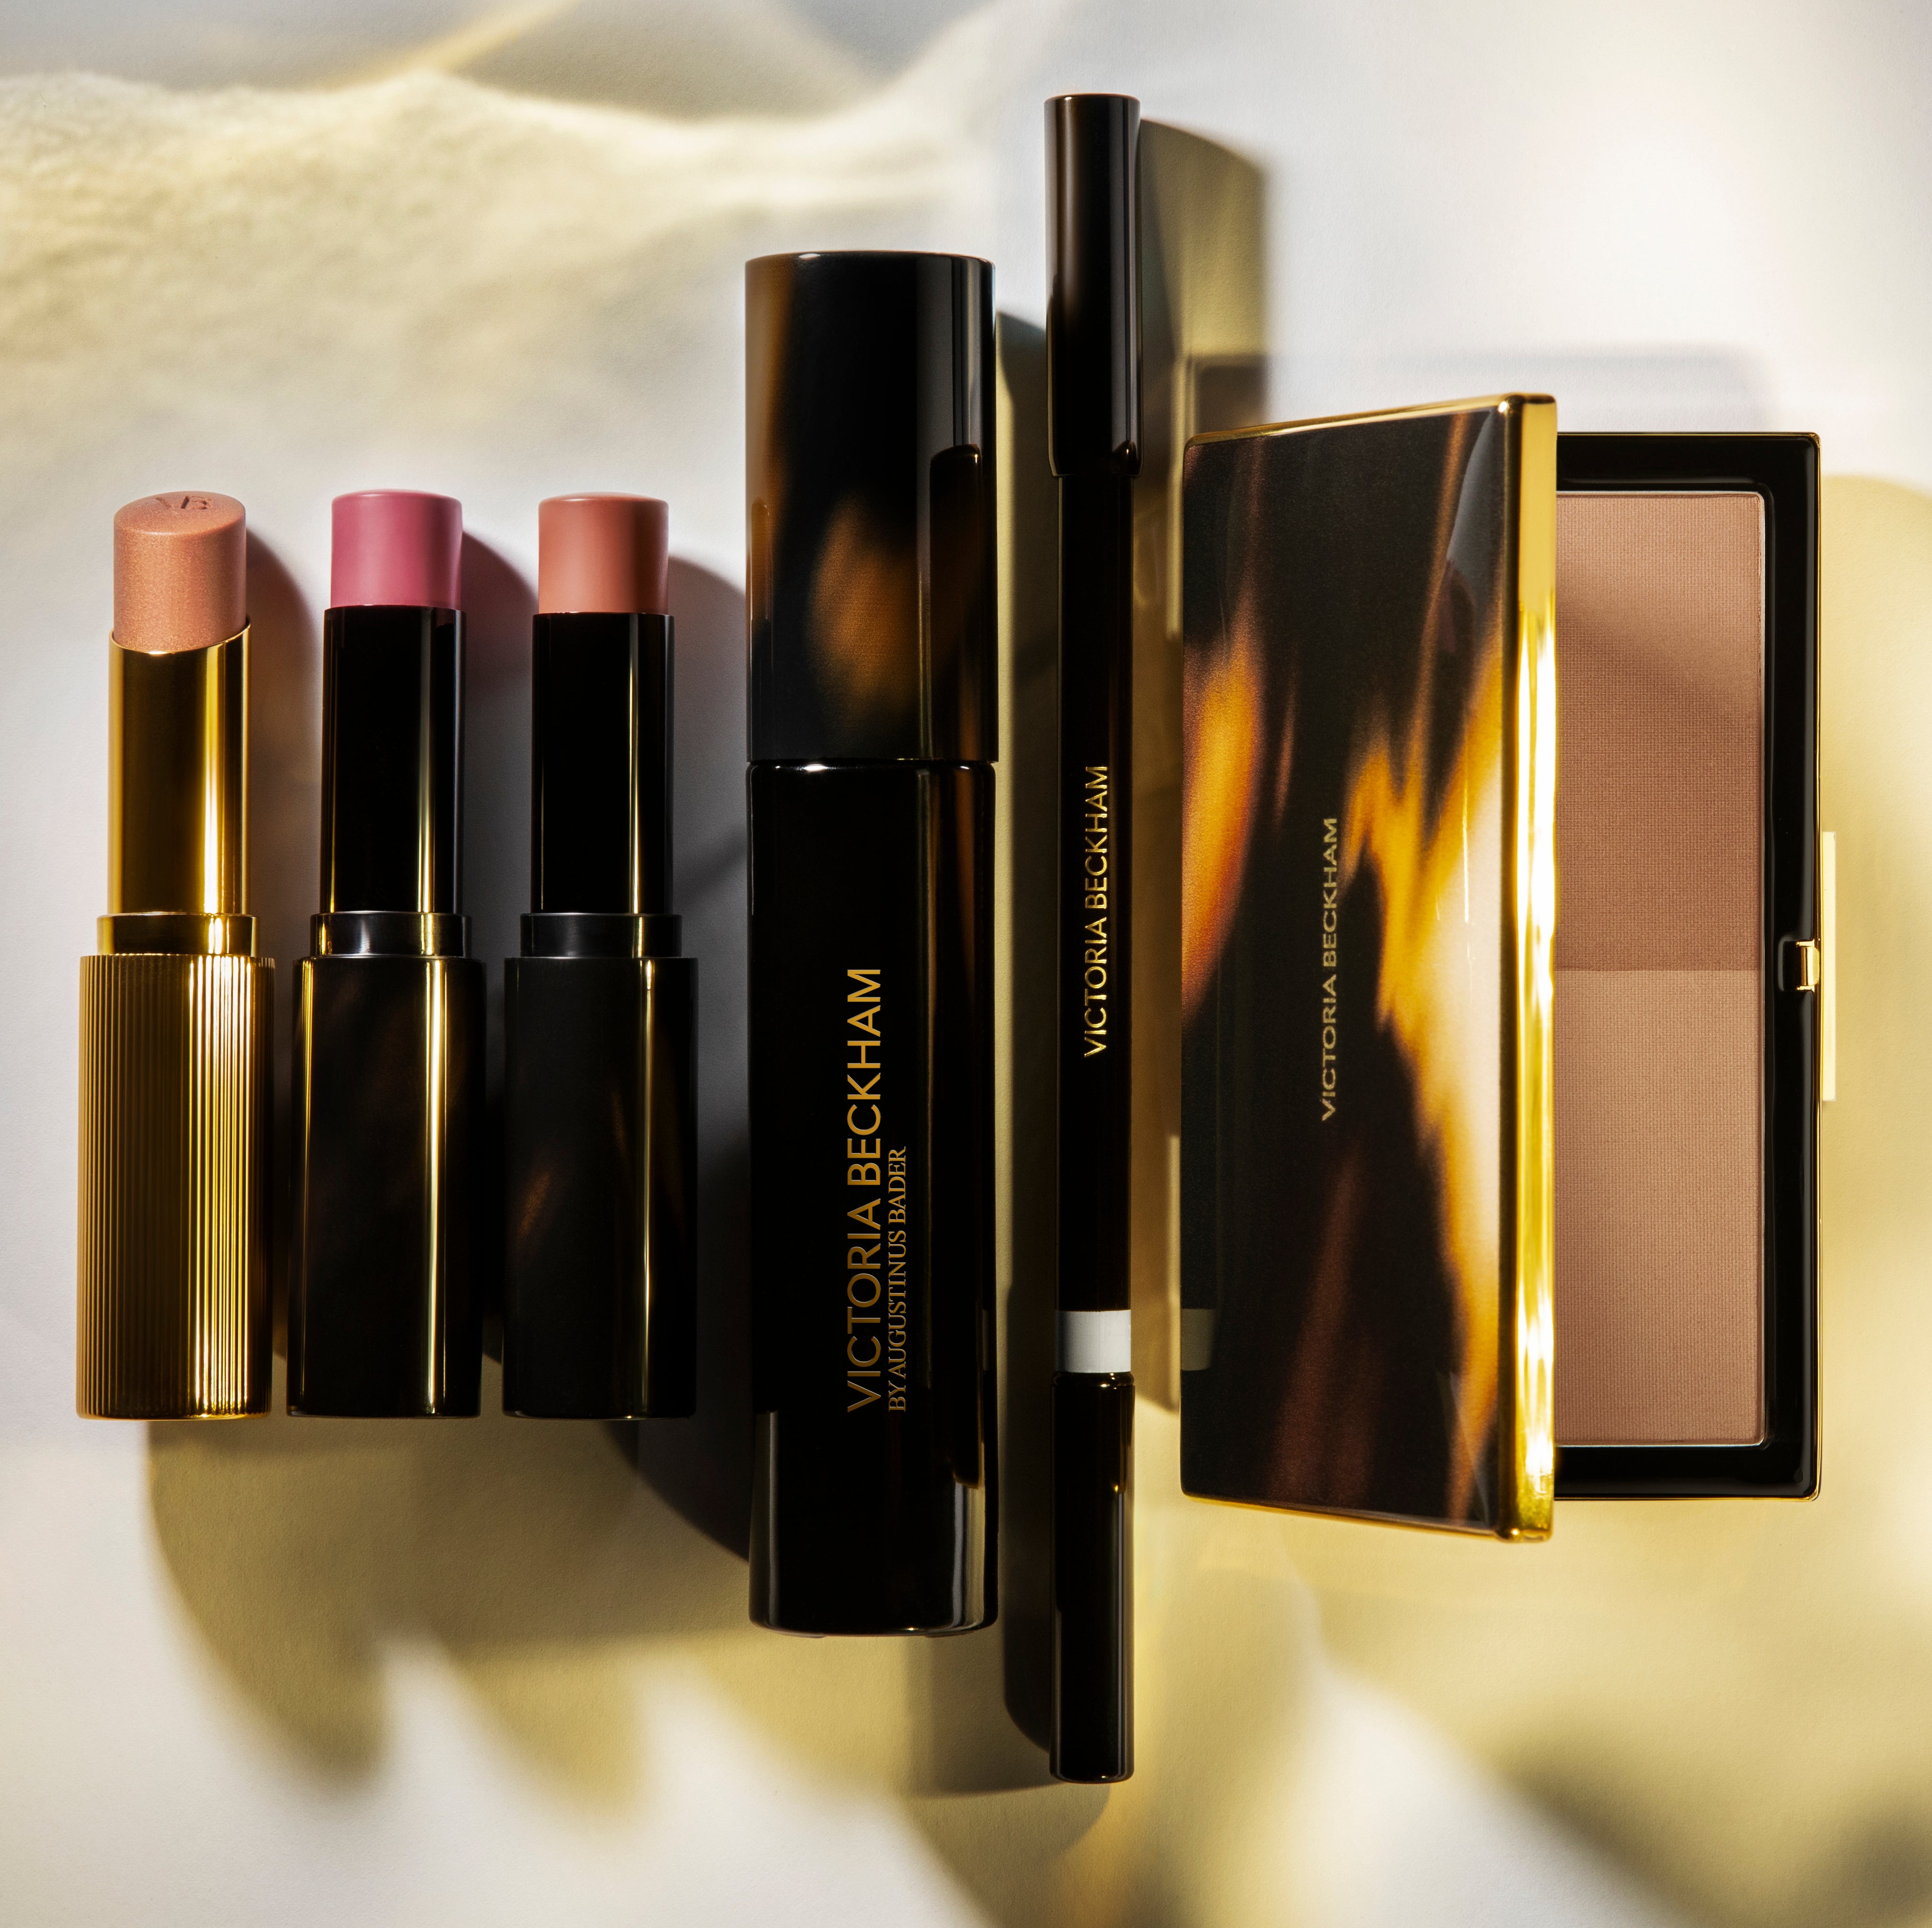 The San Ysidro Drive Collection – Victoria Beckham Beauty